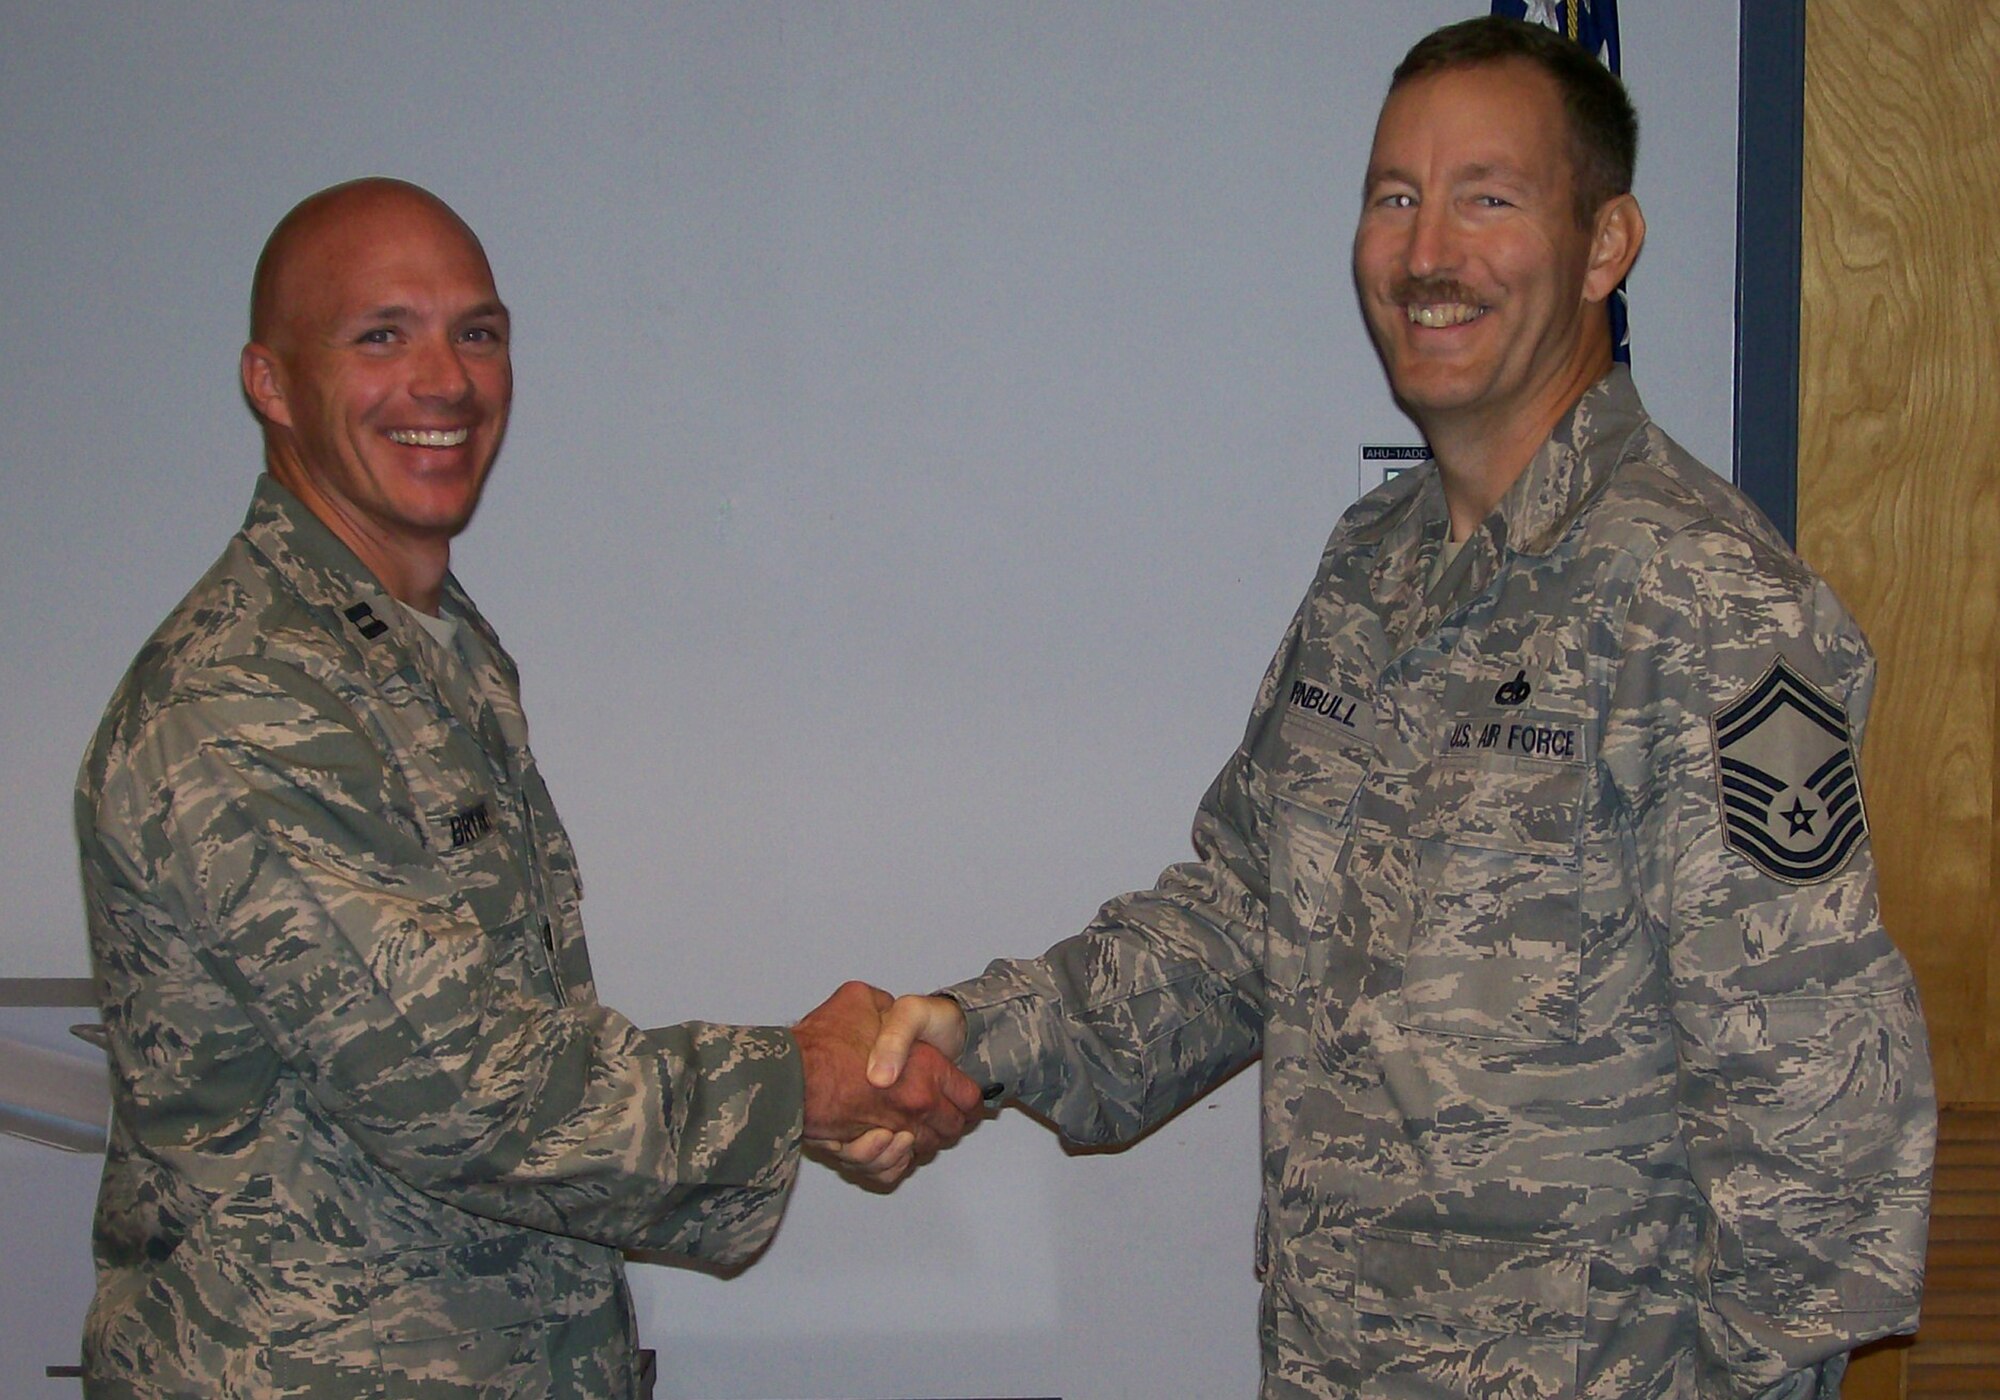 Capt. Christopher Bryant shakes hands with Senior Master Sgt. Andy Turnbull, both from the 1st Special Operations Communications Squadron Tactical Communications Flight, Hurlburt Field, Fla. The 1st SOCS initiated a base-wide bone marrow drive March 28 to help support Sergeant Turnbull who was diagnosed with acute myeloid leukemia July 19, 2010. (Courtesy Photo)